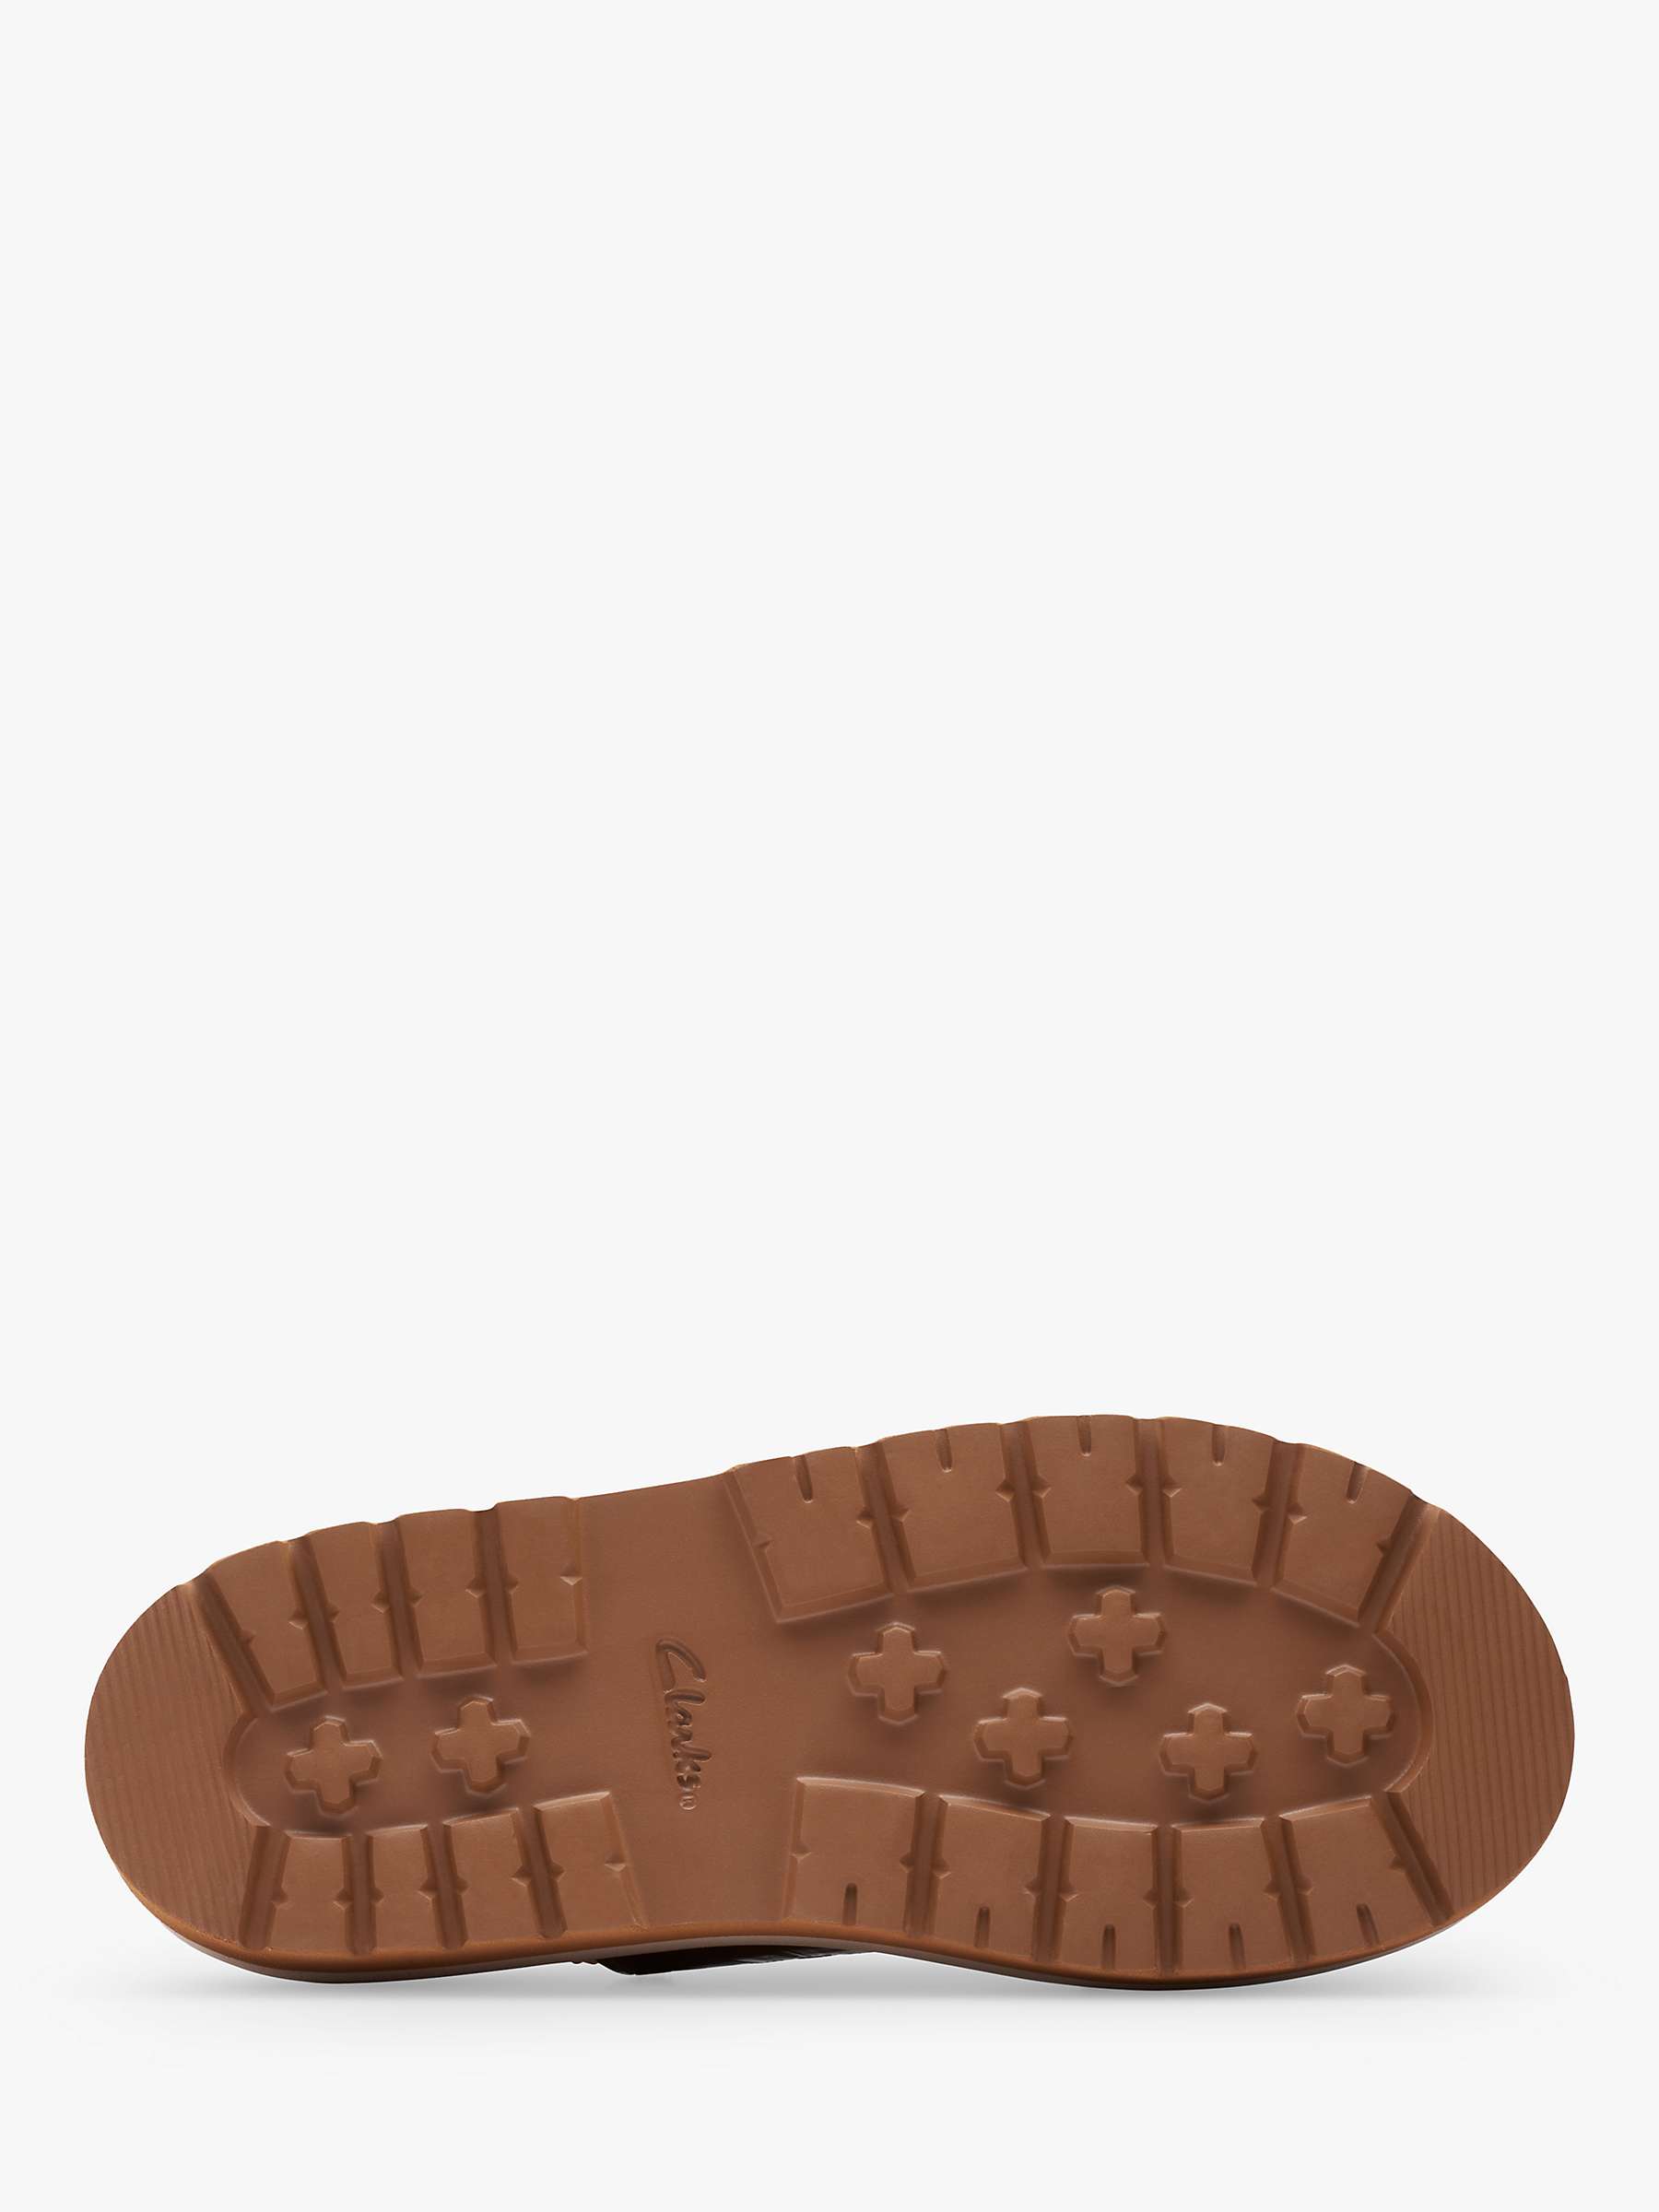 Buy Clarks Orianna Glide Textured Leather Chunky Sole Sandals Online at johnlewis.com